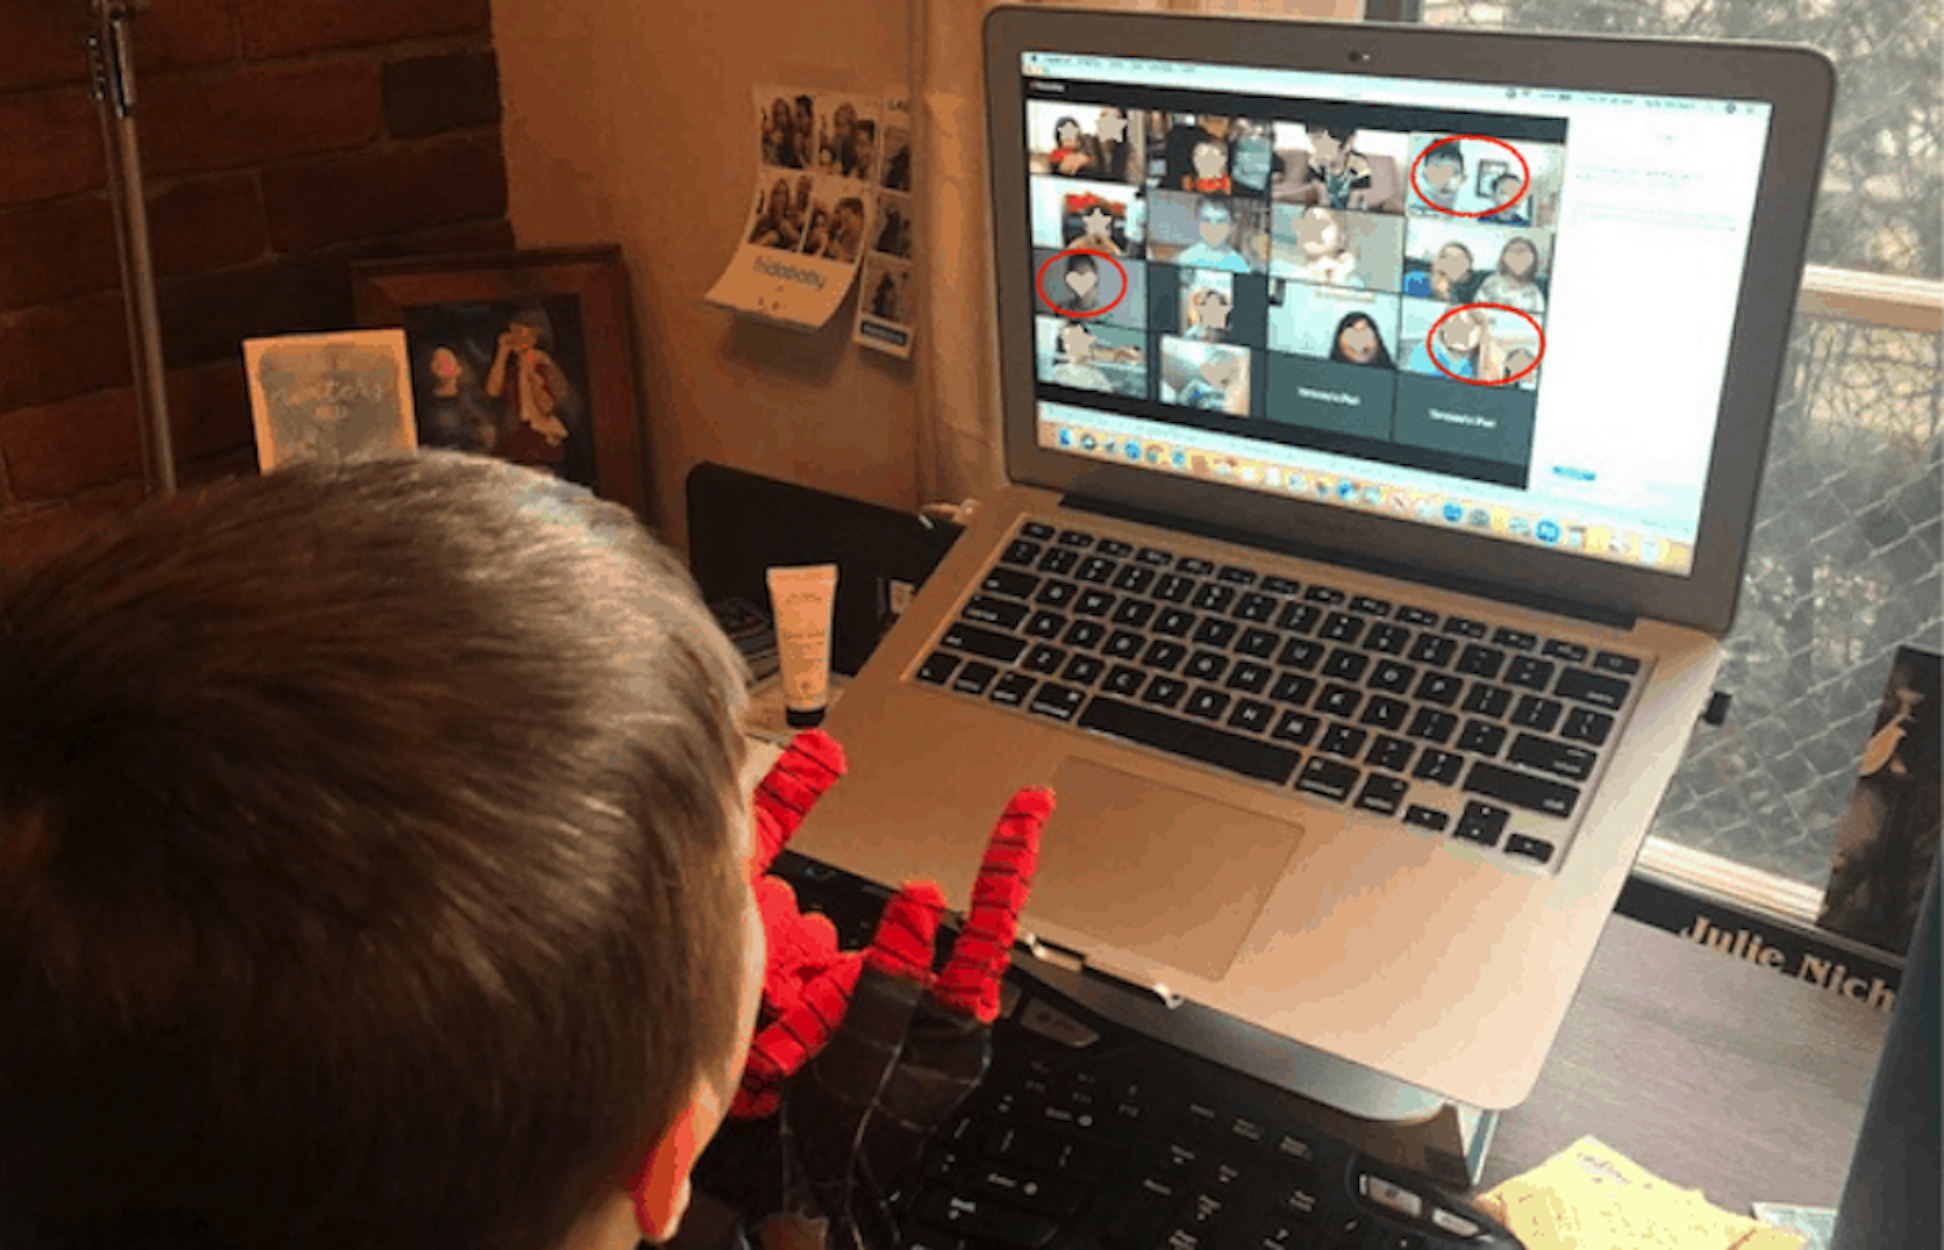 boy looking at screen with several faces and some obscured